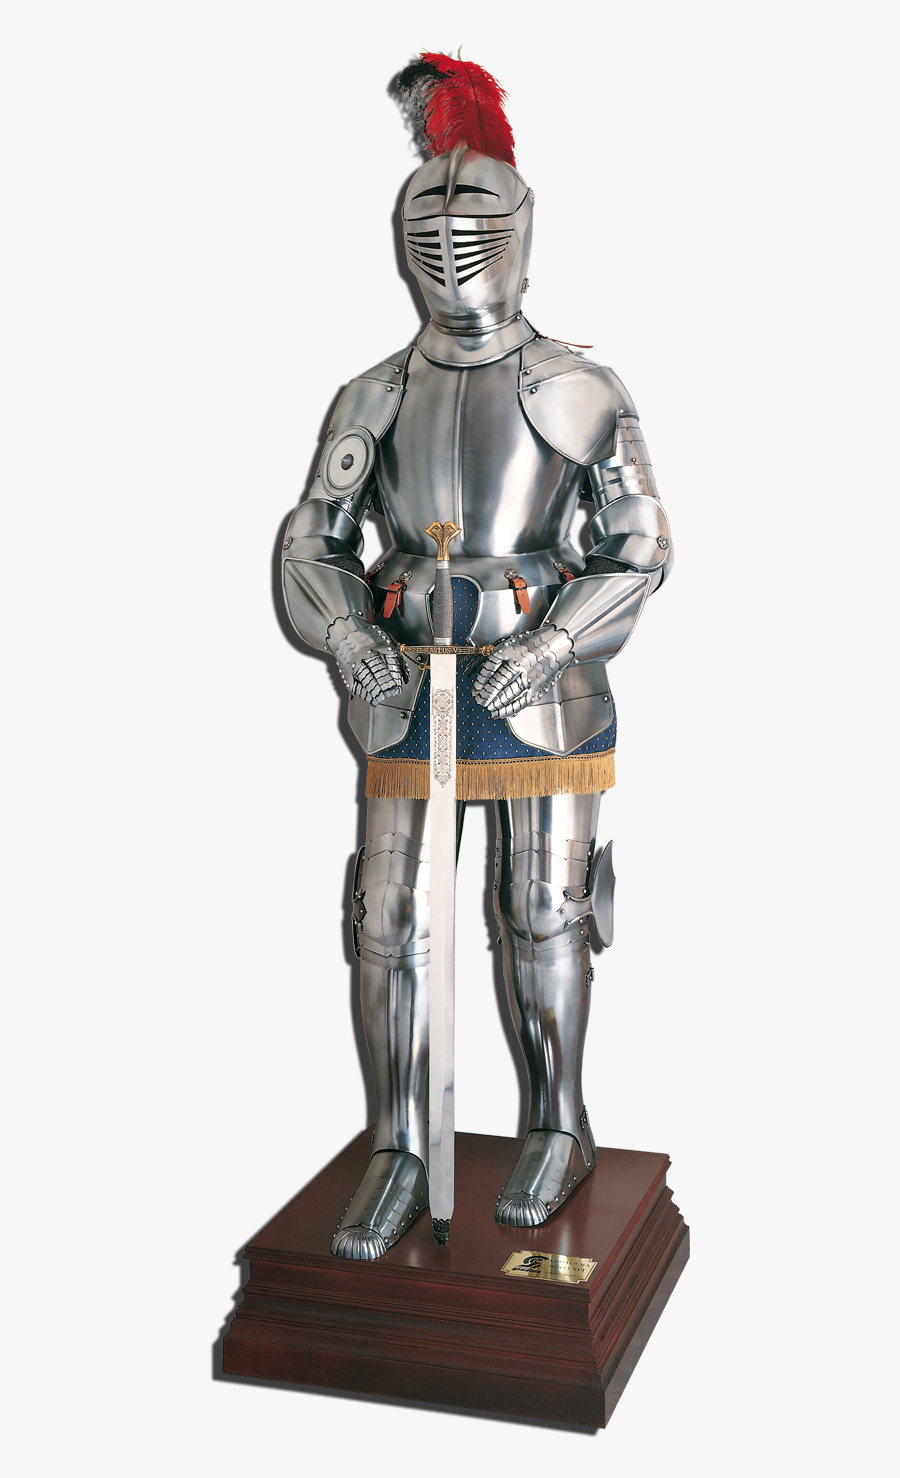 Knight Armor Png - Armor Knight Full Body, Transparent Clipart